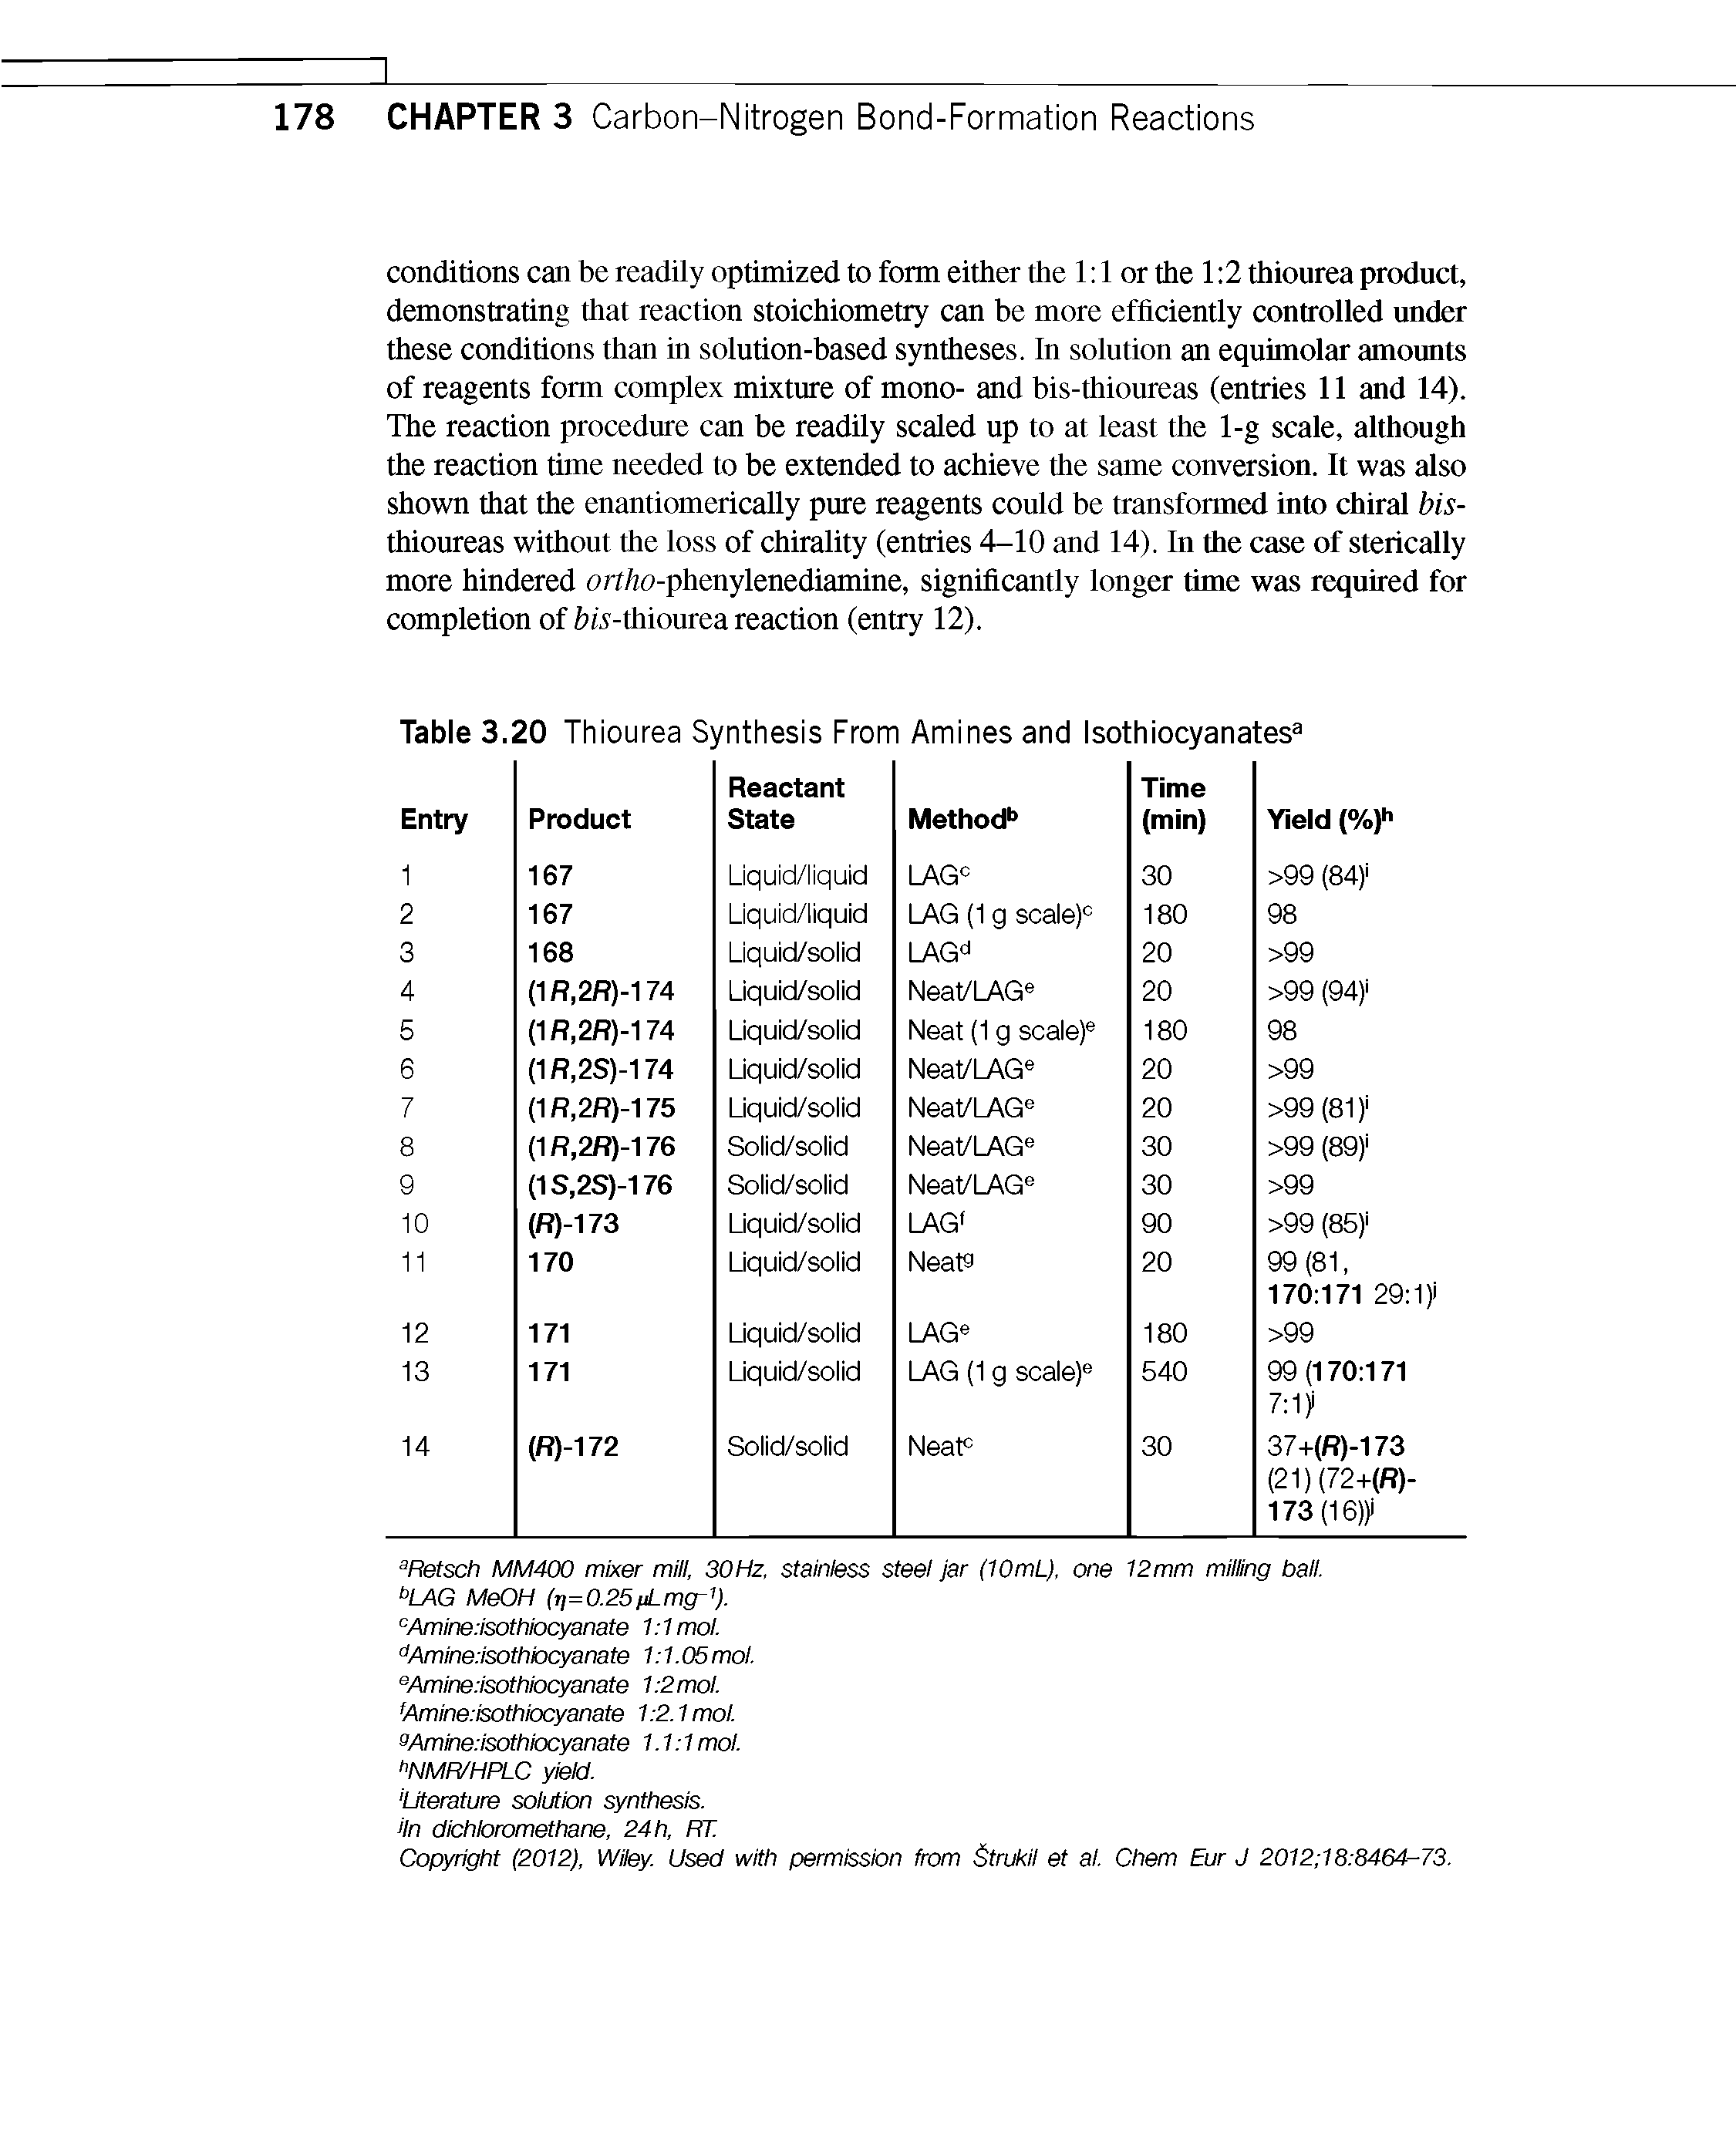 Table 3.20 Thiourea Synthesis From Amines and Isothiocyanates ...